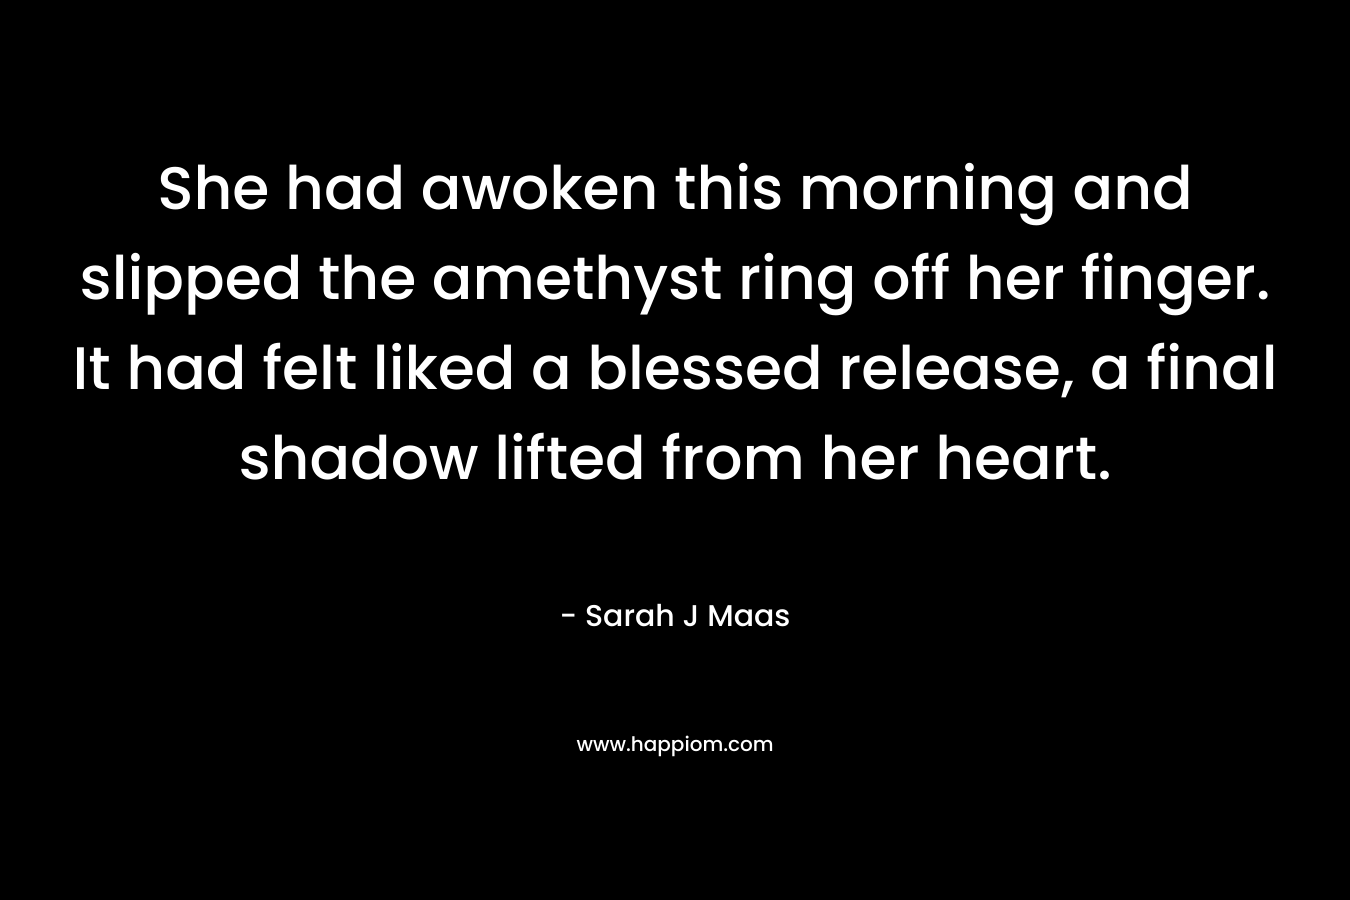 She had awoken this morning and slipped the amethyst ring off her finger. It had felt liked a blessed release, a final shadow lifted from her heart. – Sarah J Maas